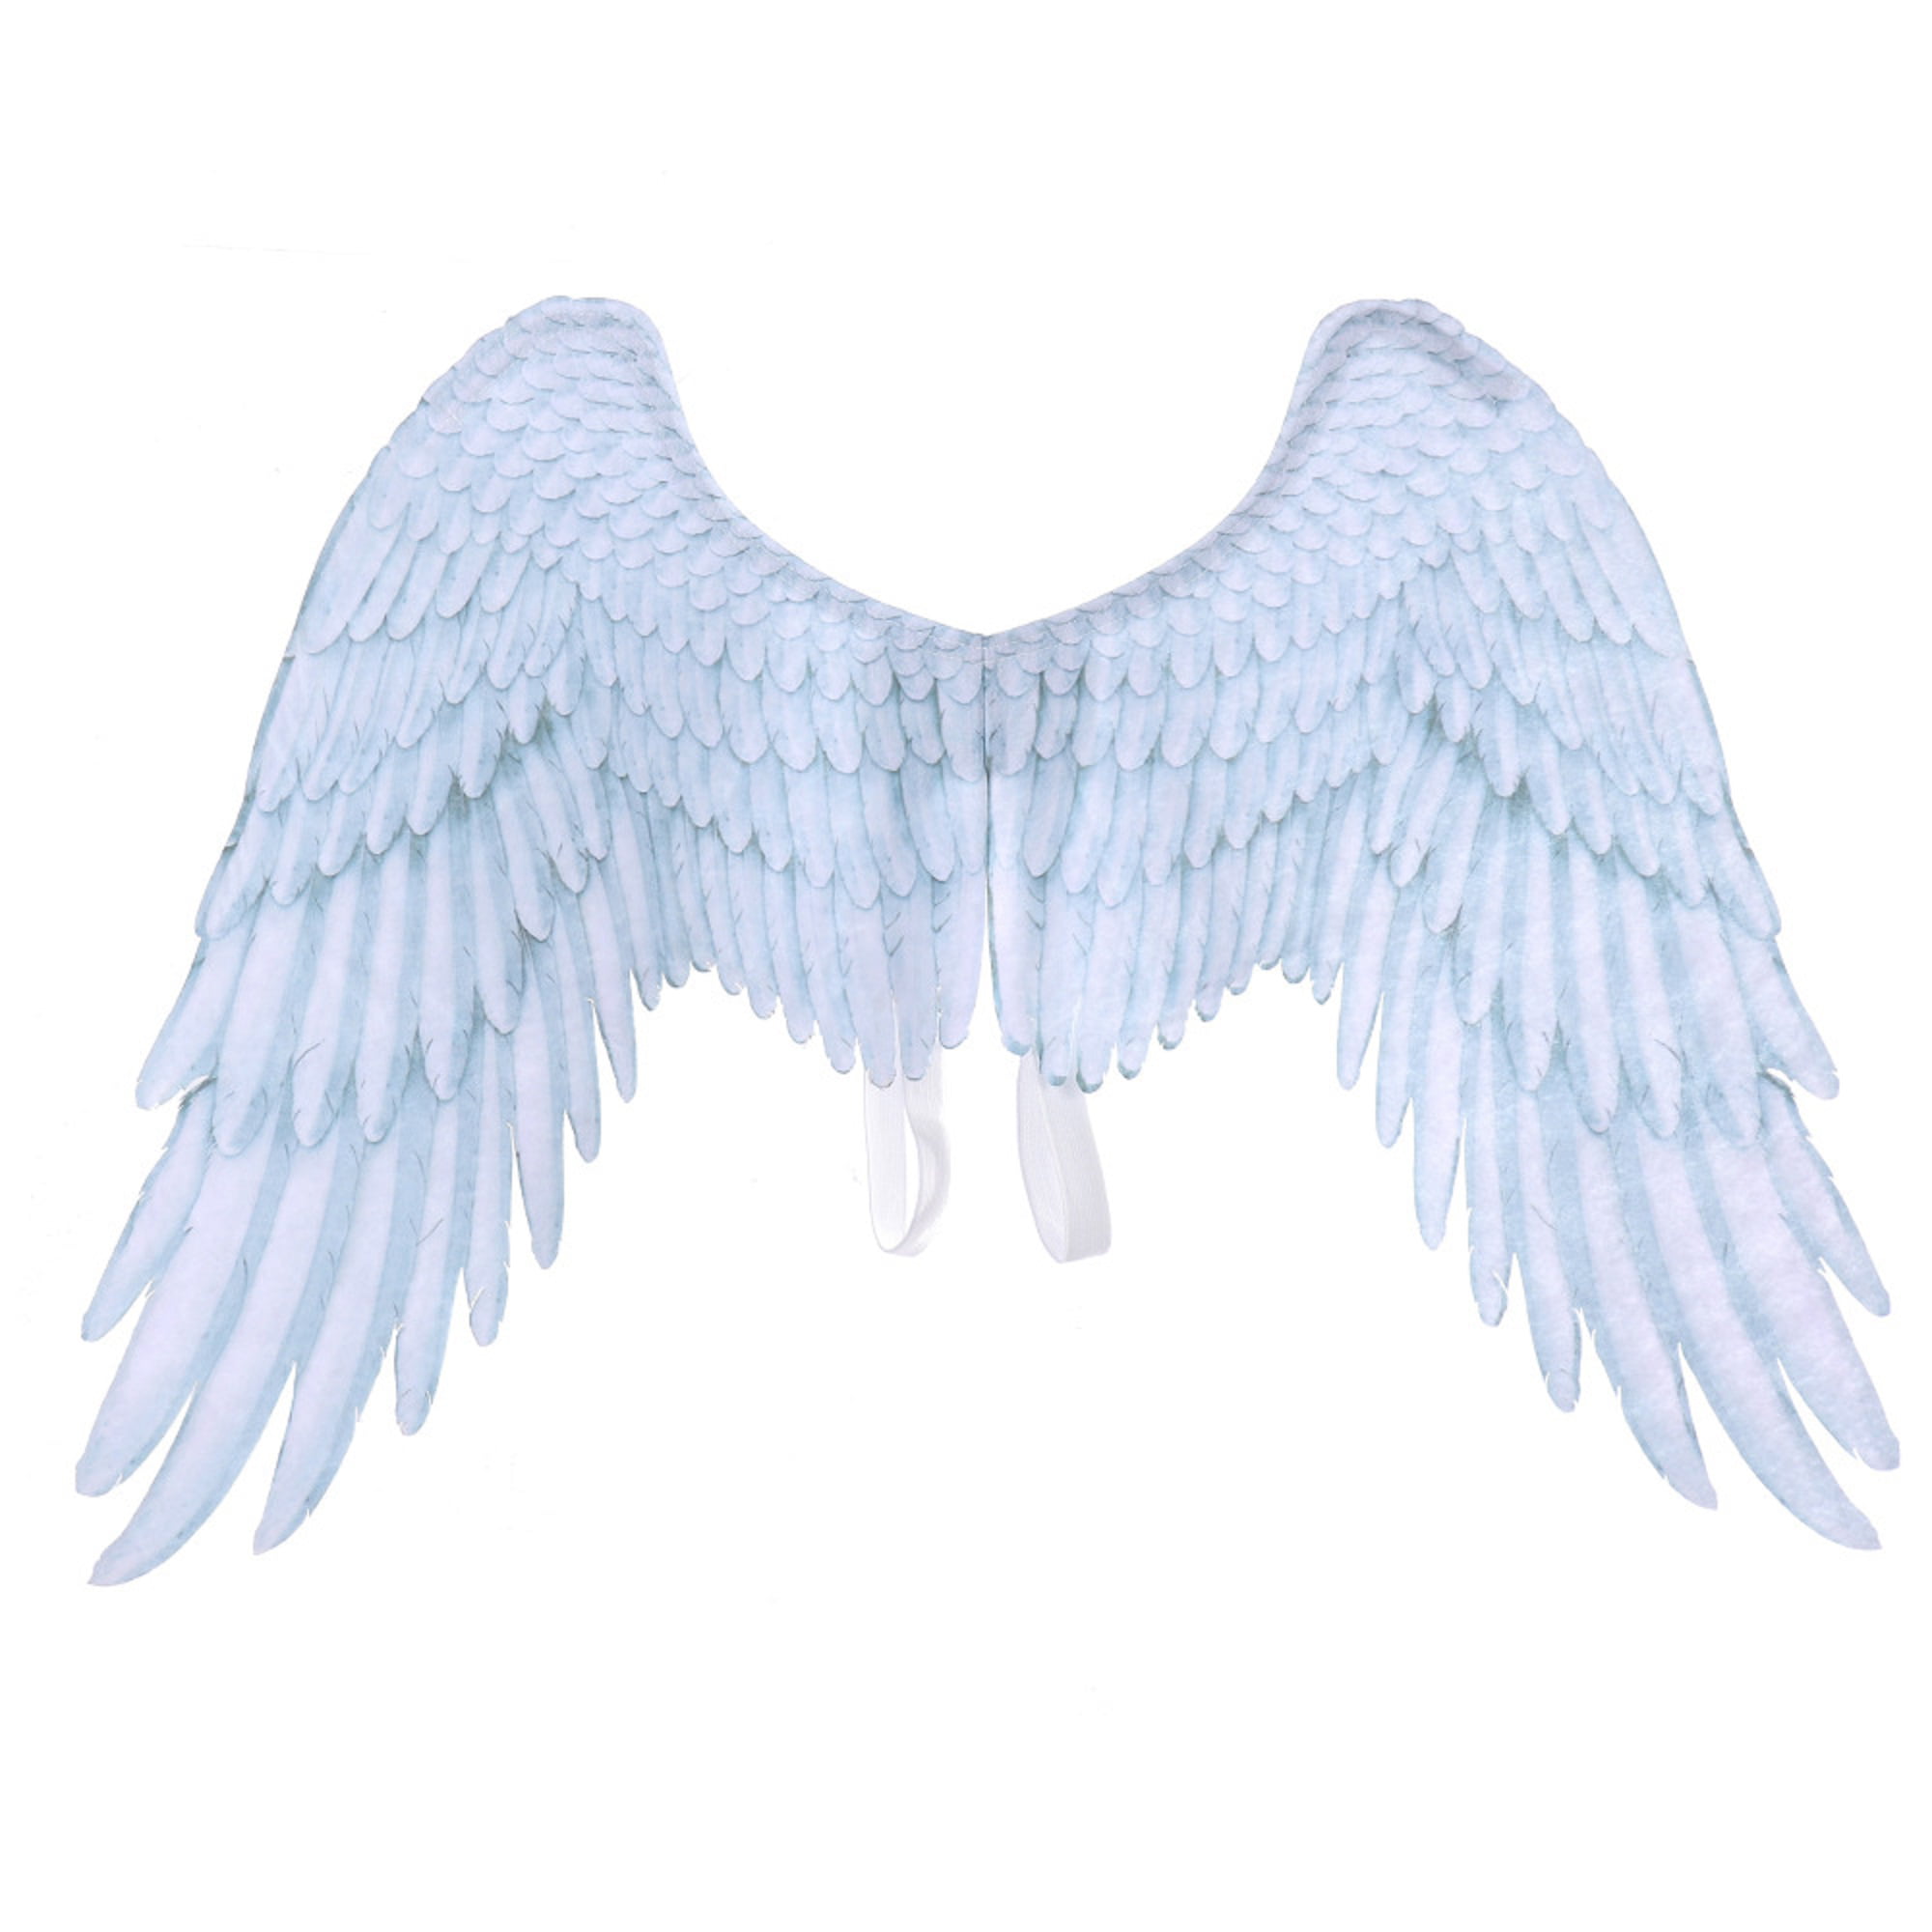 Pink Angel Wings Angel Wings Feathers Christmas Wedding Party Decor prop 